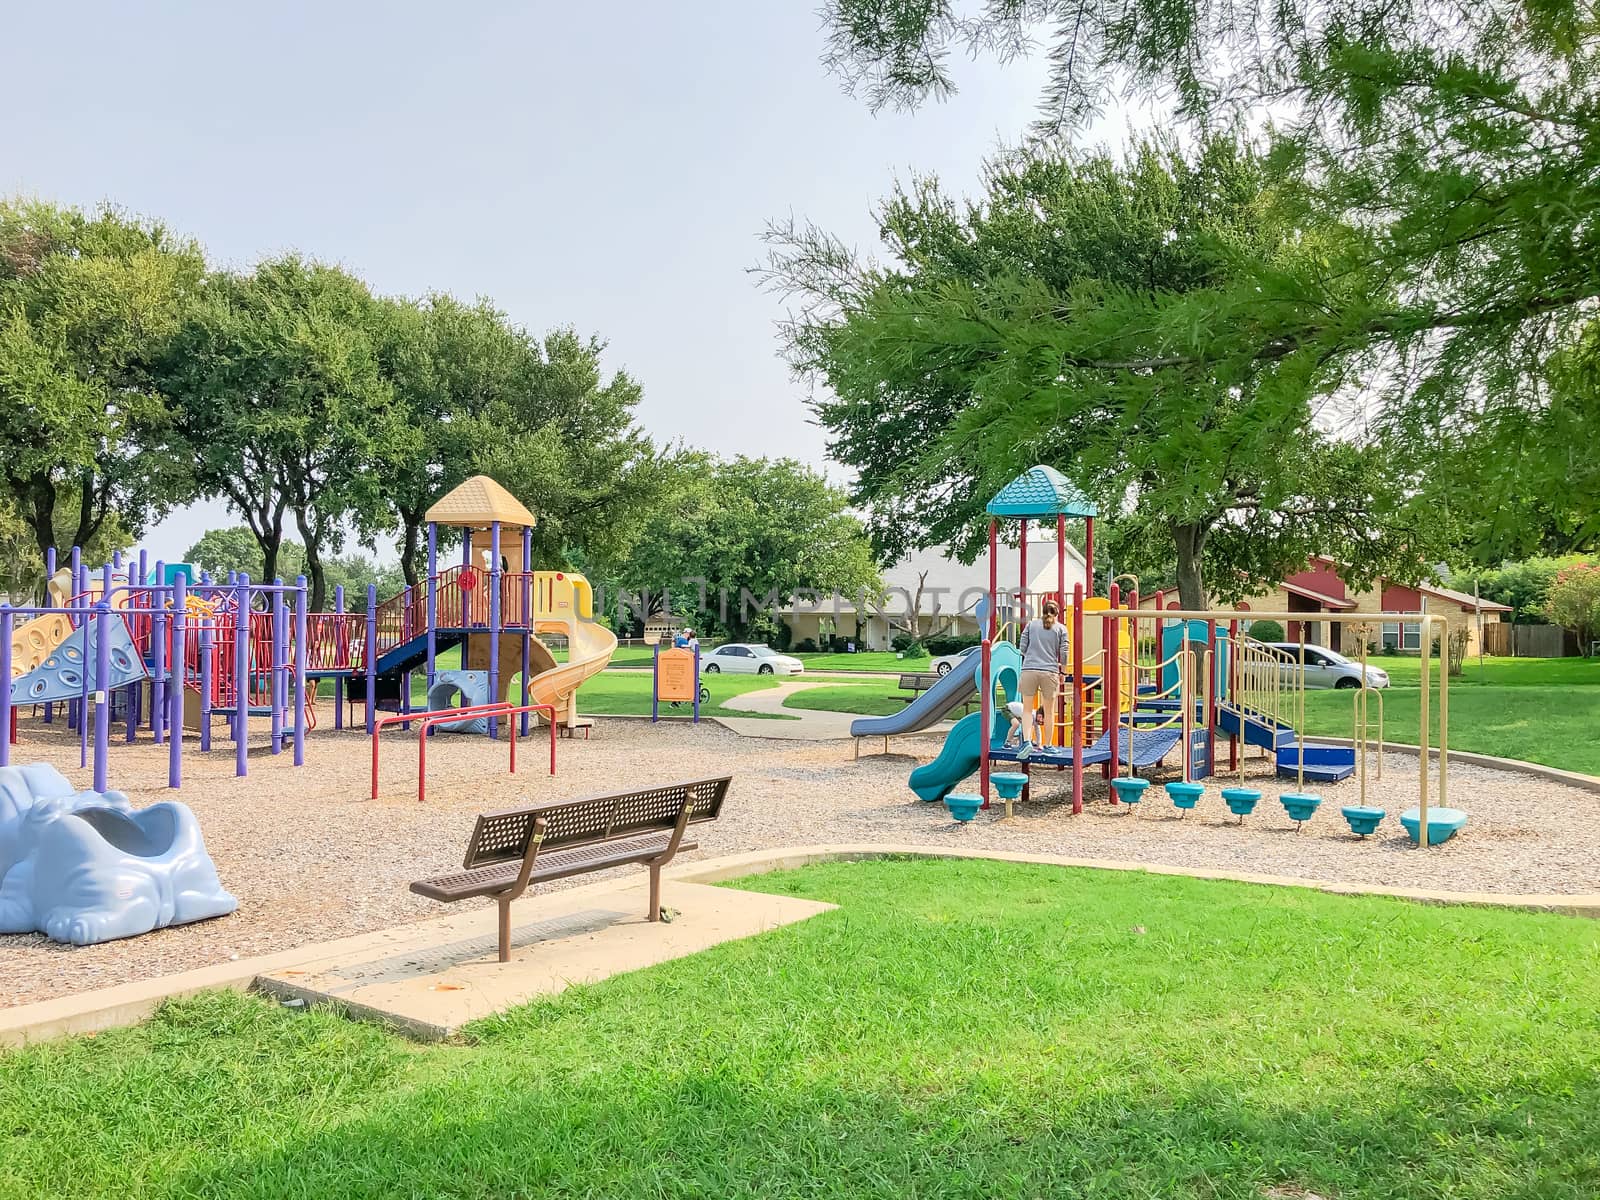 Empty metal bench at colorful playground near residential neighborhood in Richardson, Texas, America. Community facility surrounded by large oak trees, green grass lawn and single family houses